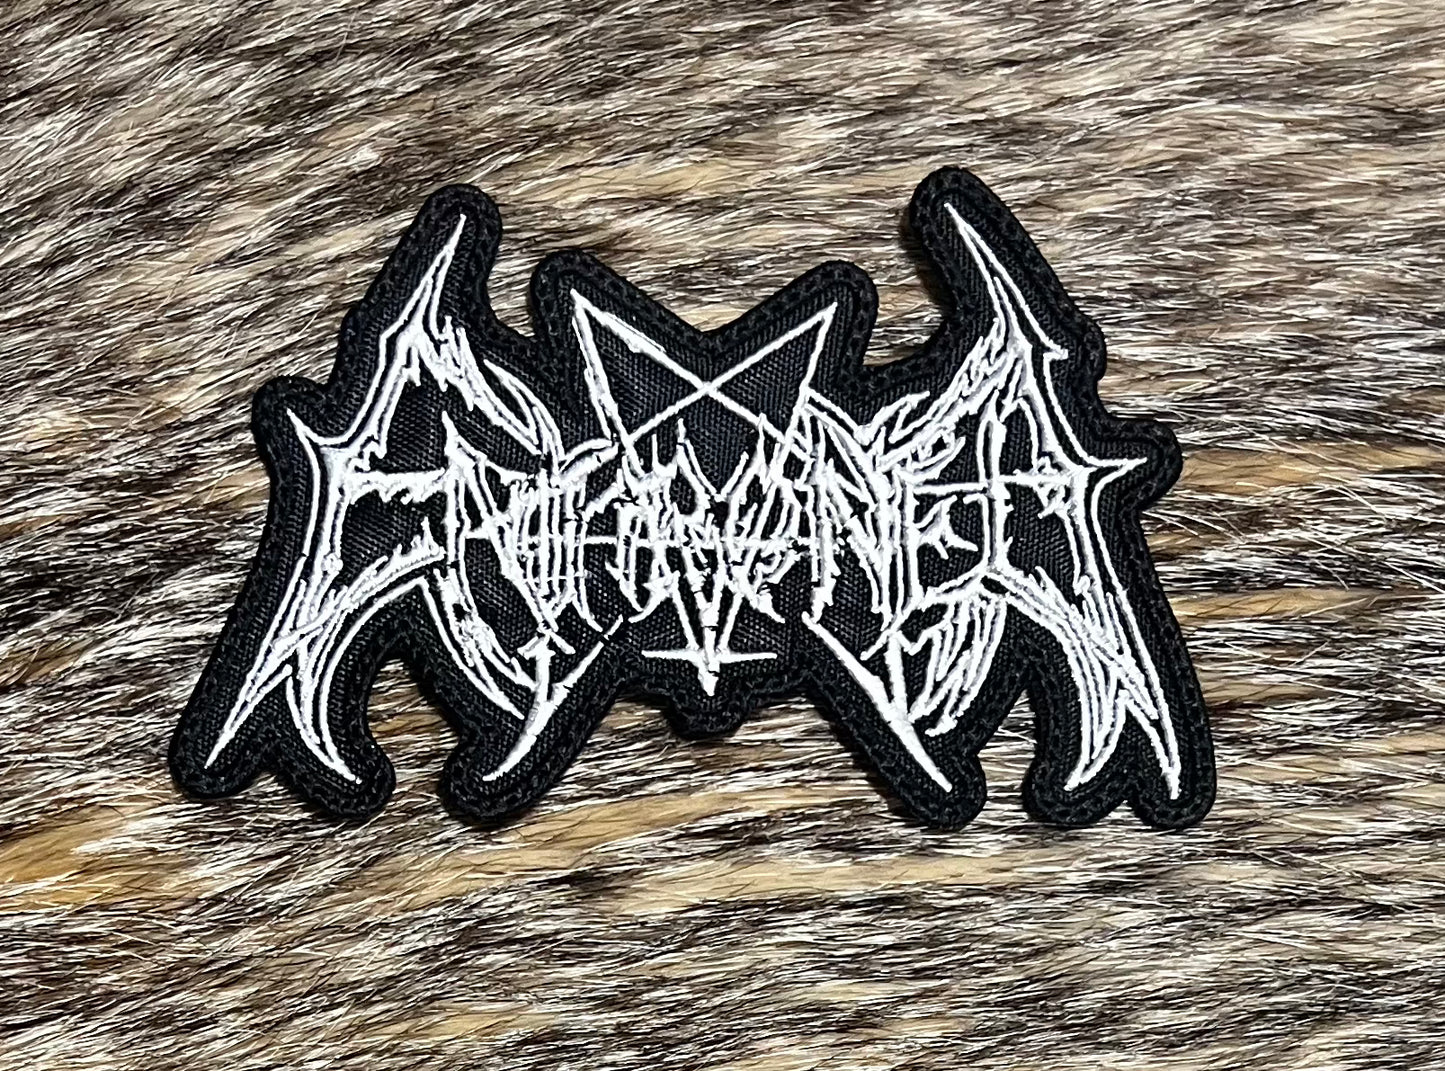 Enthroned - Cut Out Logo Patch